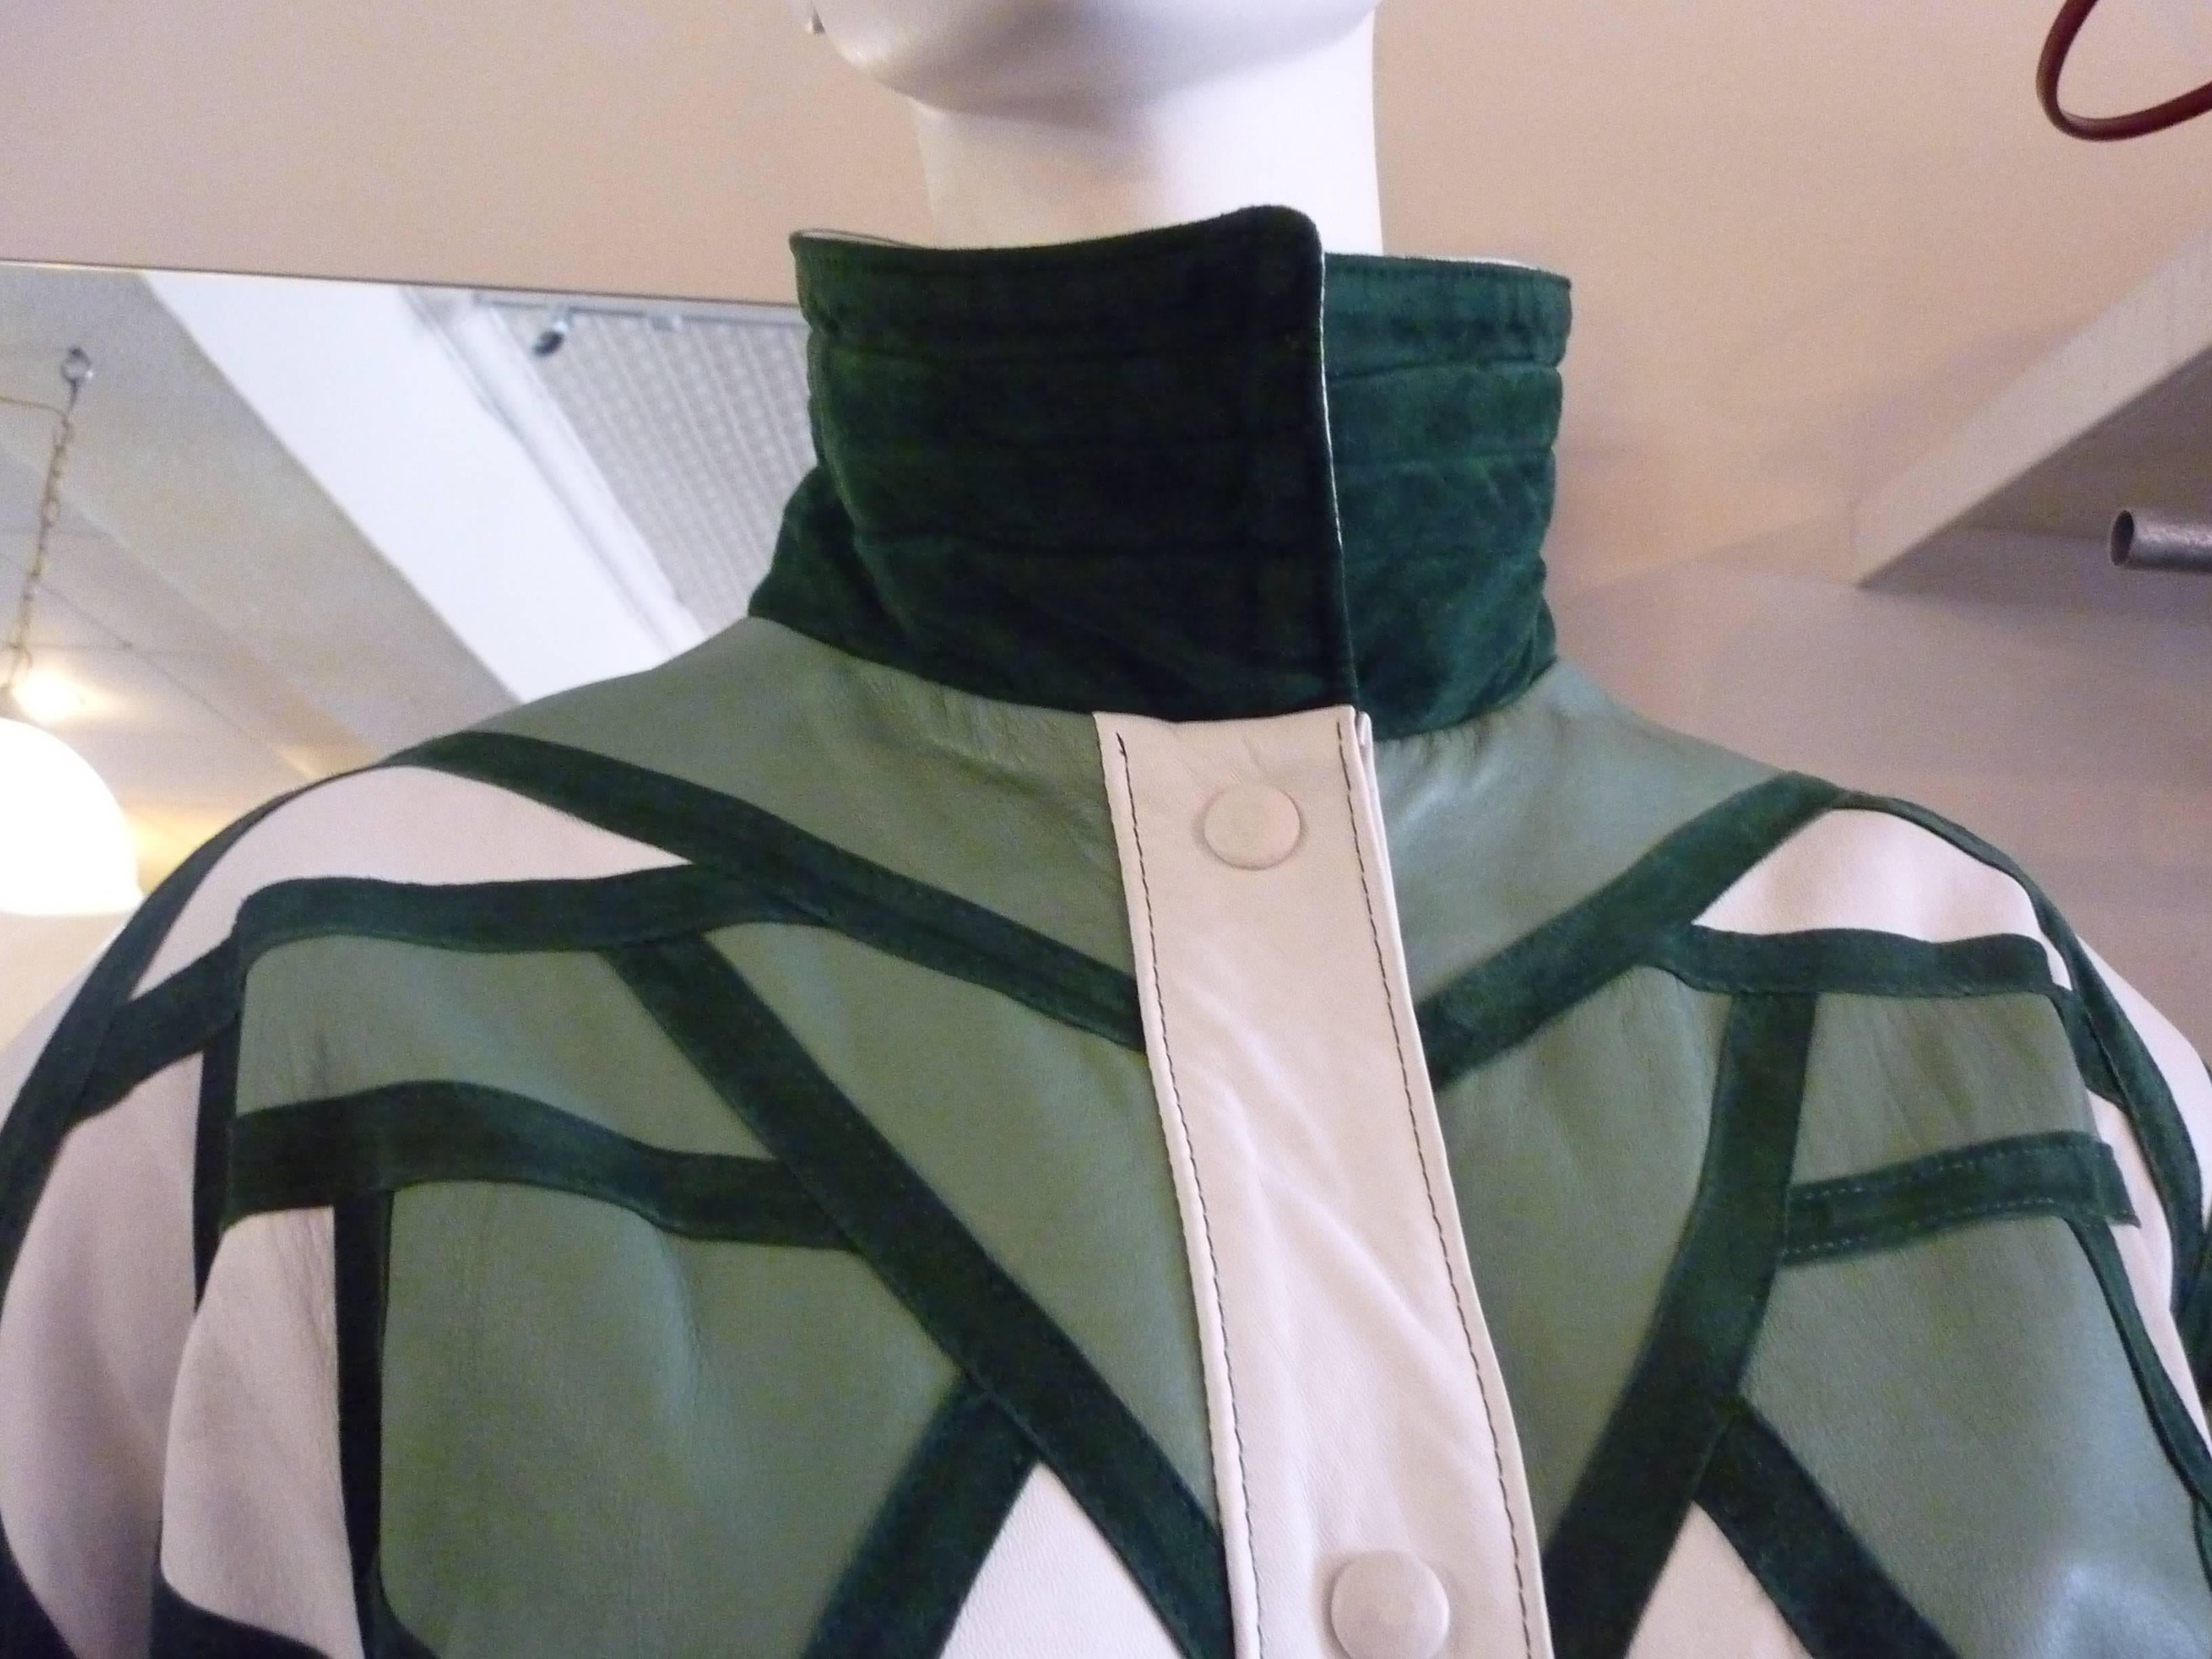 The lining is Yves Saint Laurent, but there is no label. It is a very nice jacket regardless, with snap button closure and a collar which when raised reveals green suede.

The colors are light green with darker green borders and a creamy